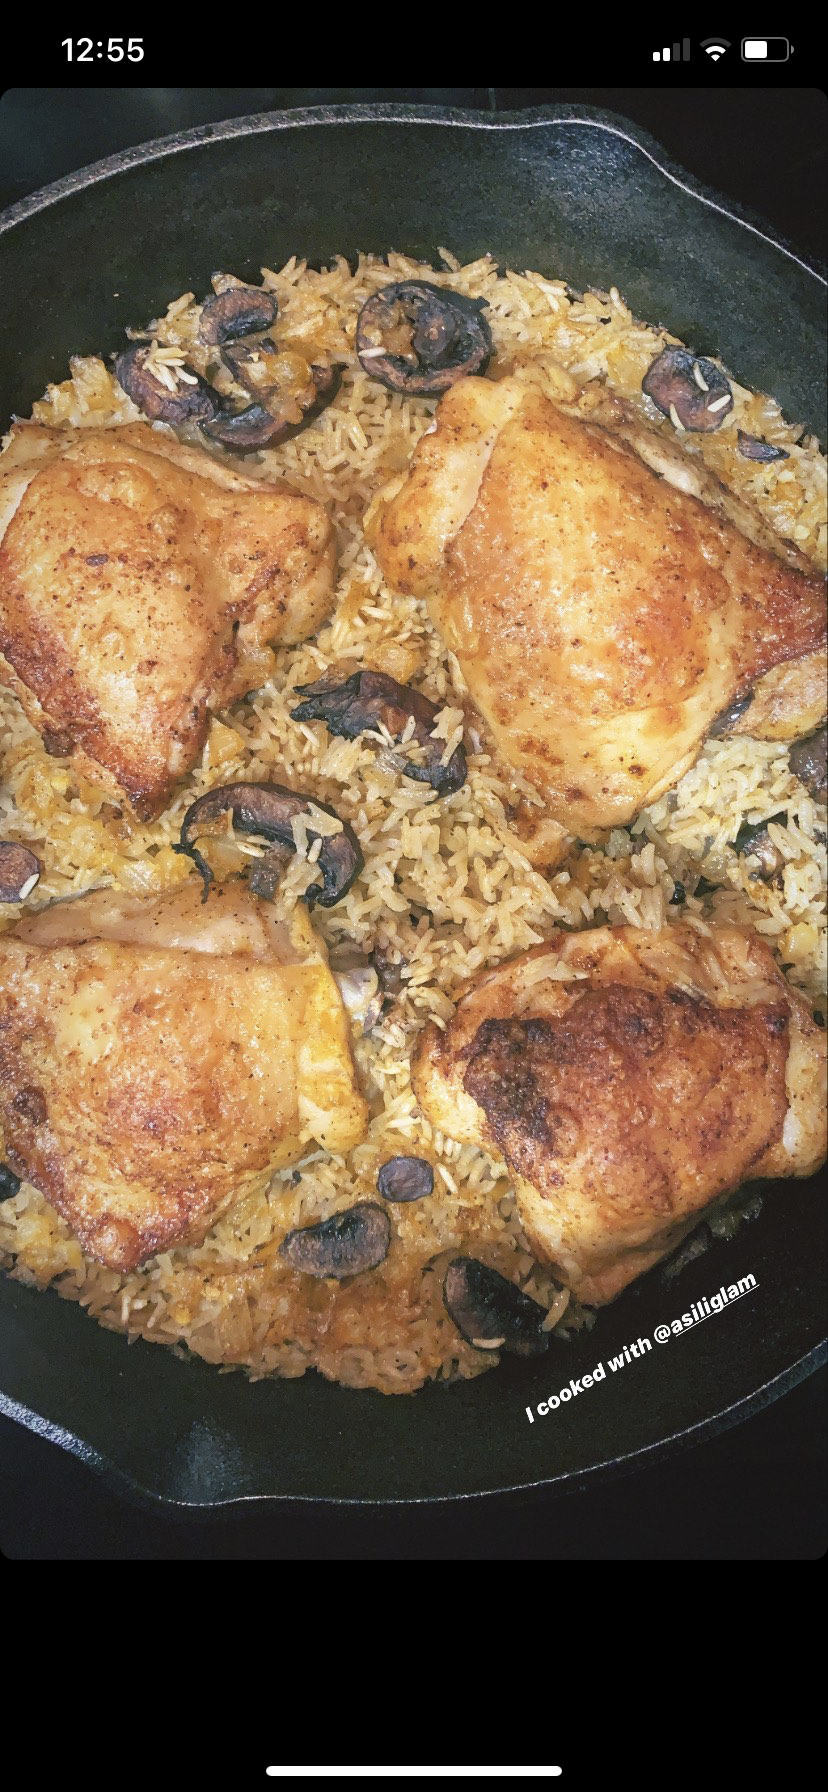 One Pot Chicken and Rice